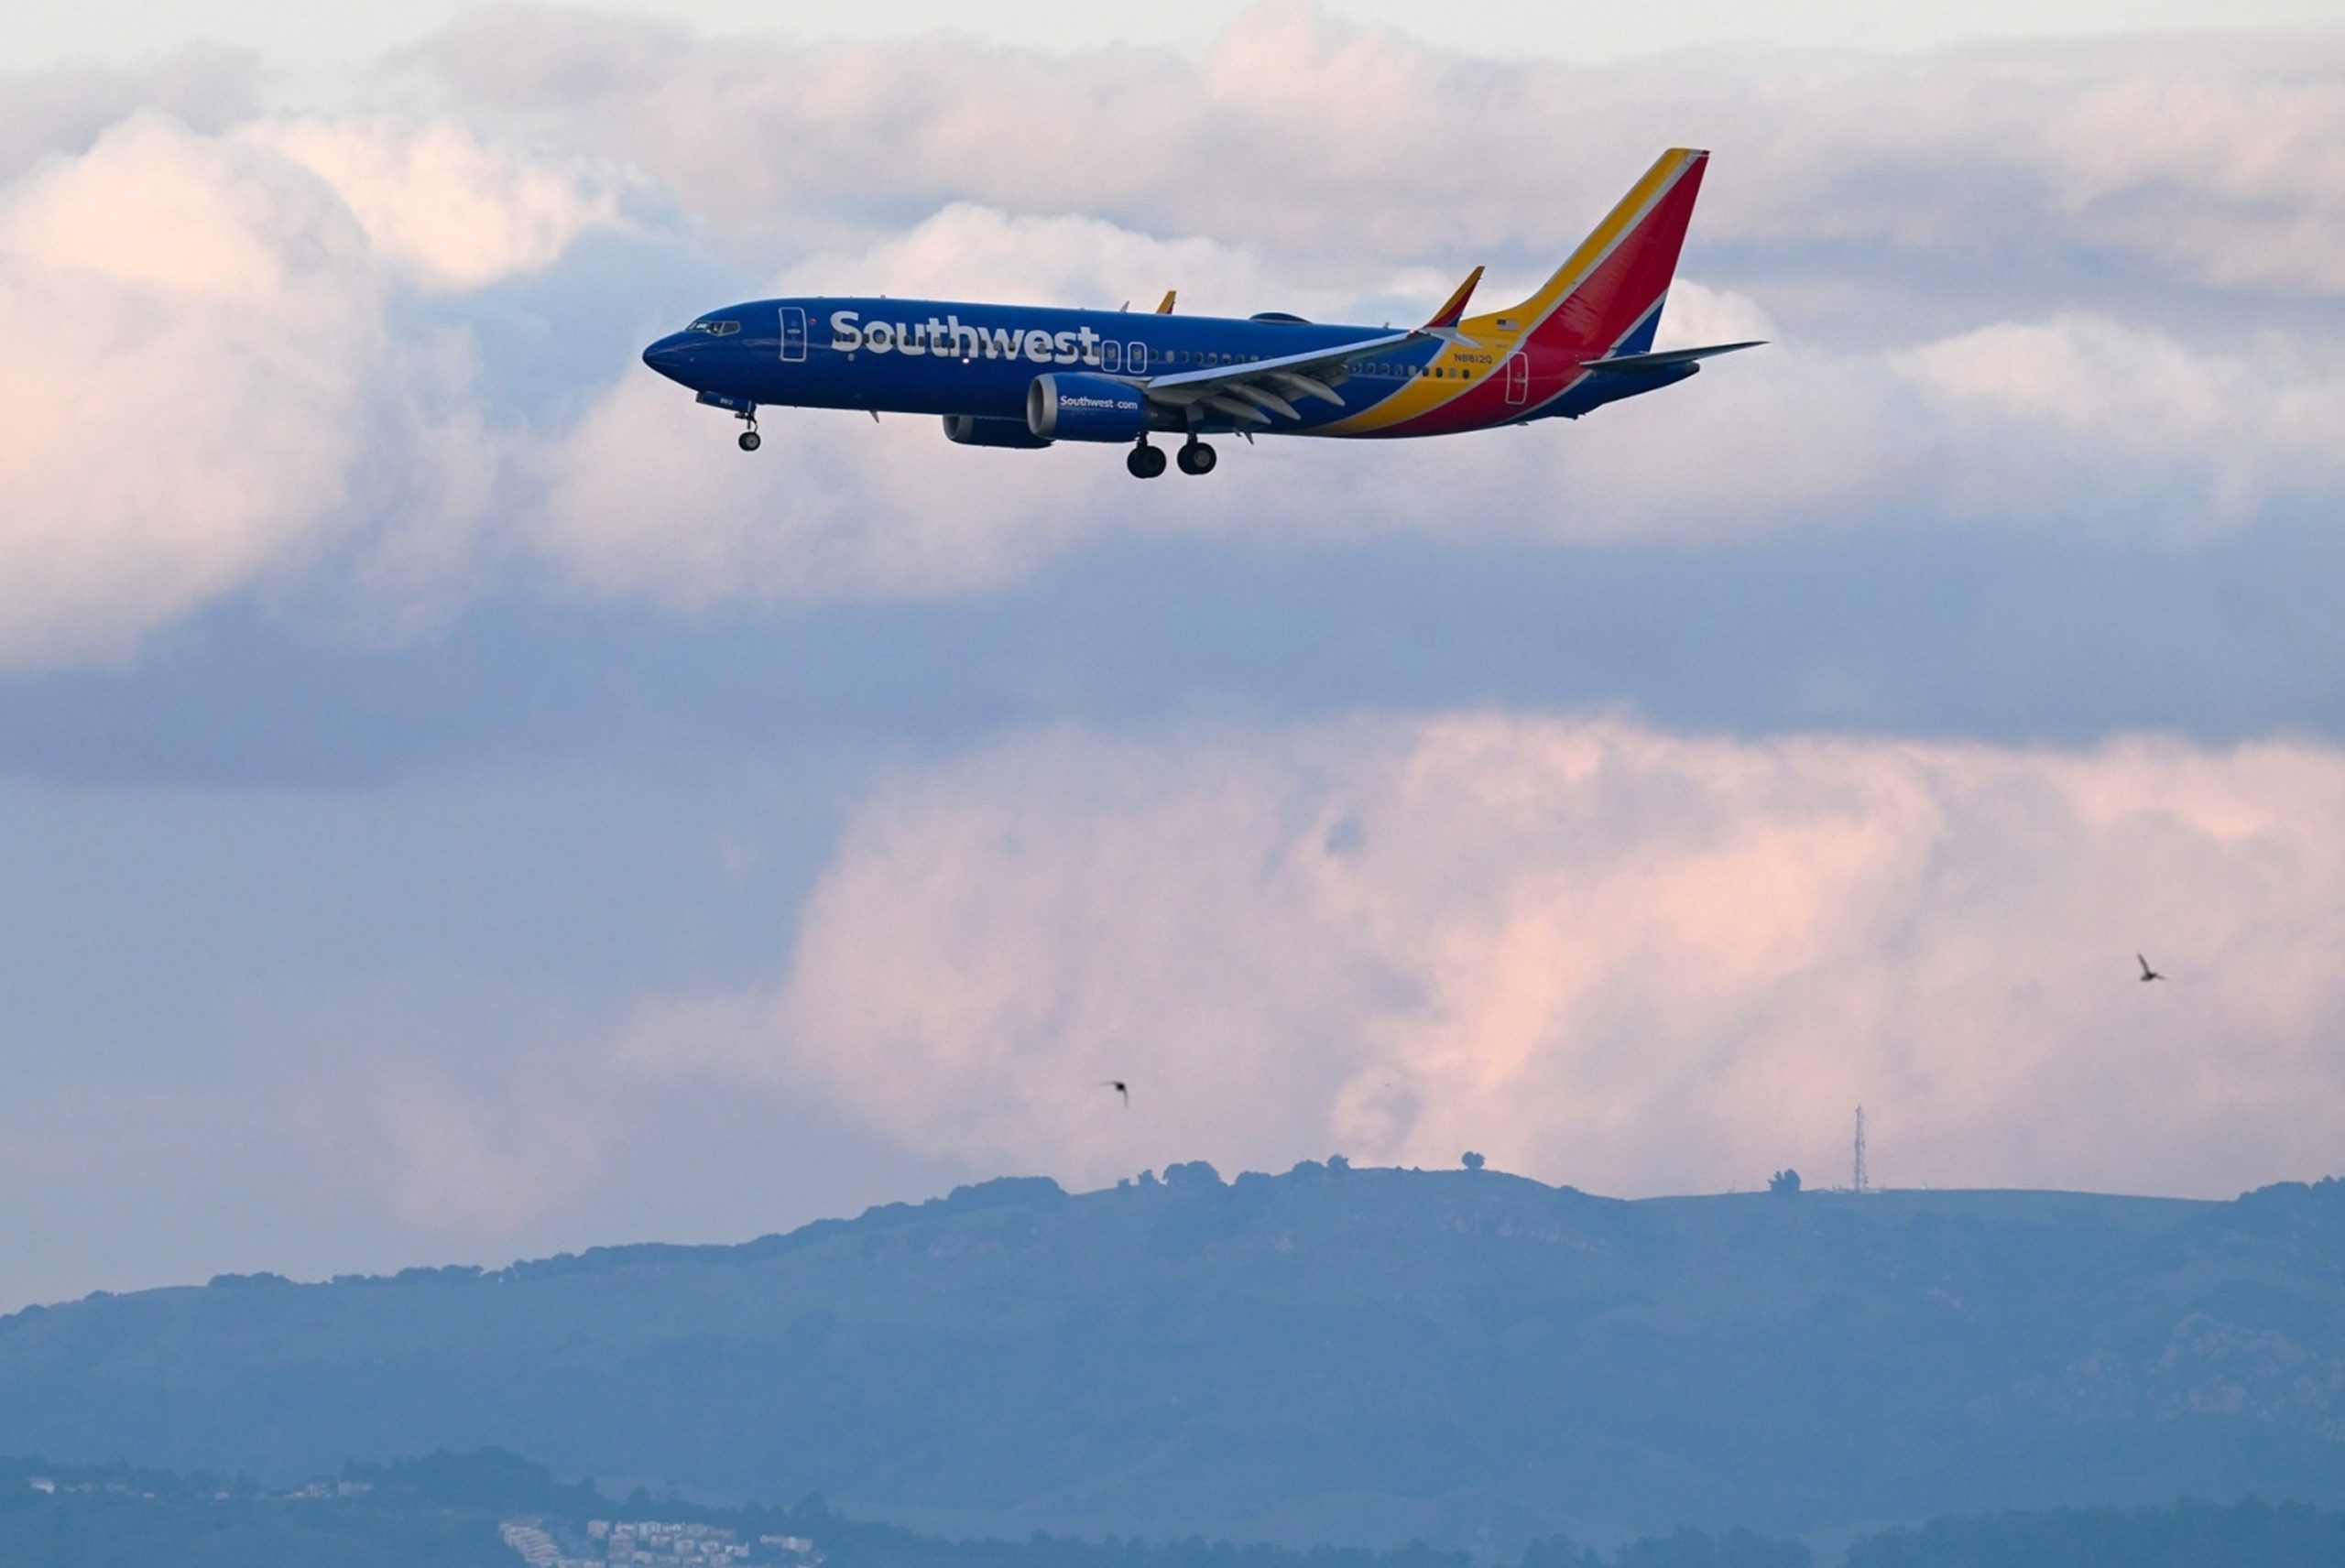 FAA Investigating Southwest Airlines Plane for Descending Dangerously Low During Airport Approach